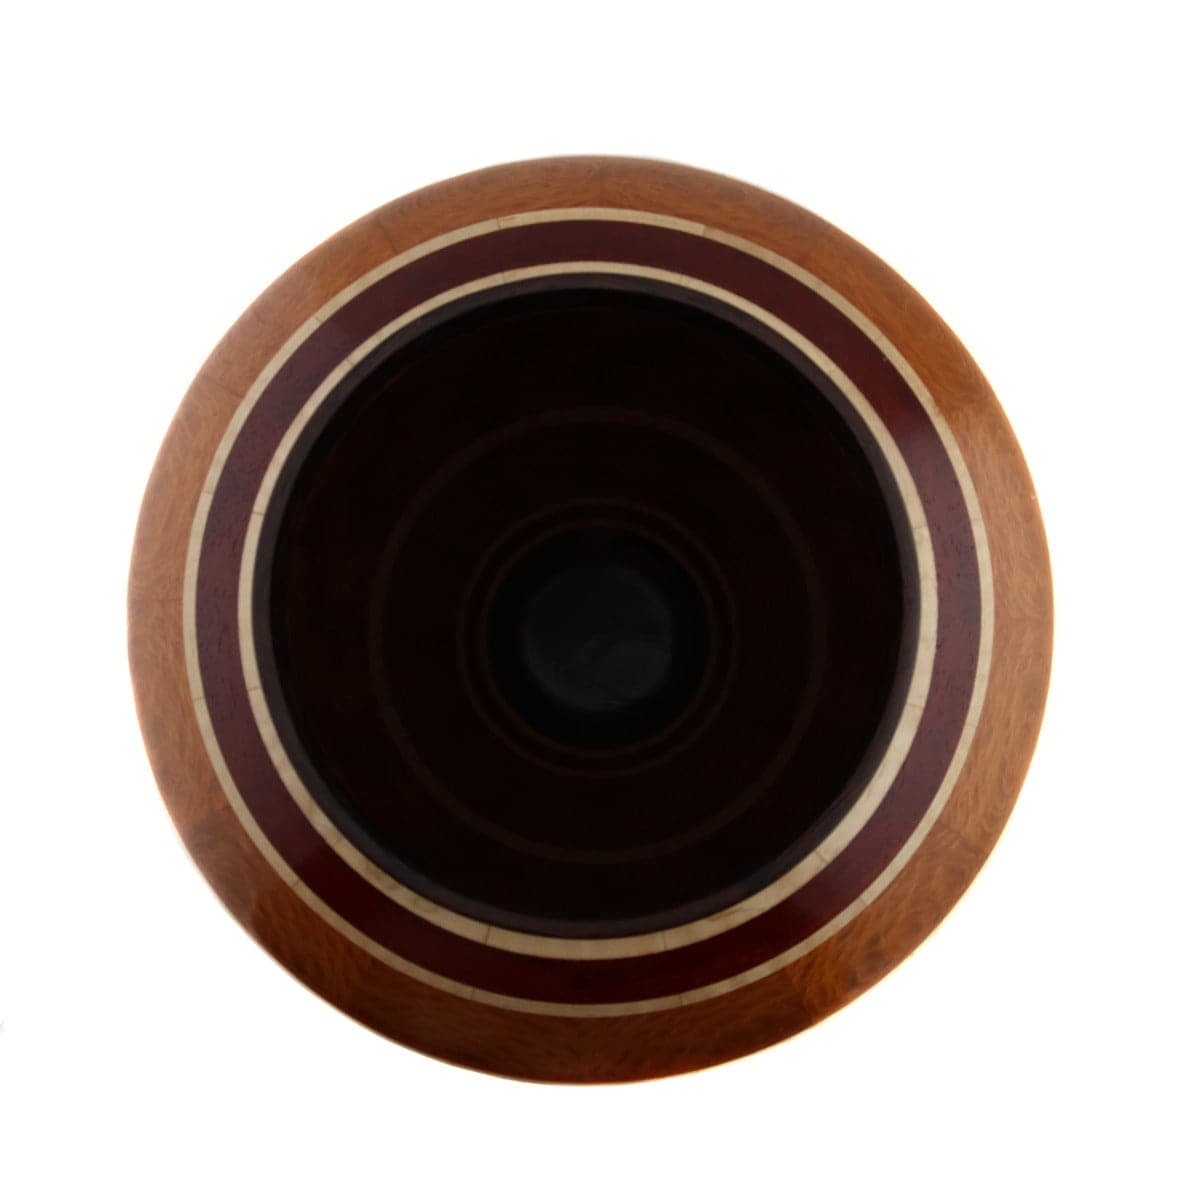 Marilyn Endres and Eucled Moore - Segmented Wood Turning of Maple, Australian Lacewood, Wenge, and Contemporary and Antique Beads, 17" x 13" (M90572-0122-004) 4